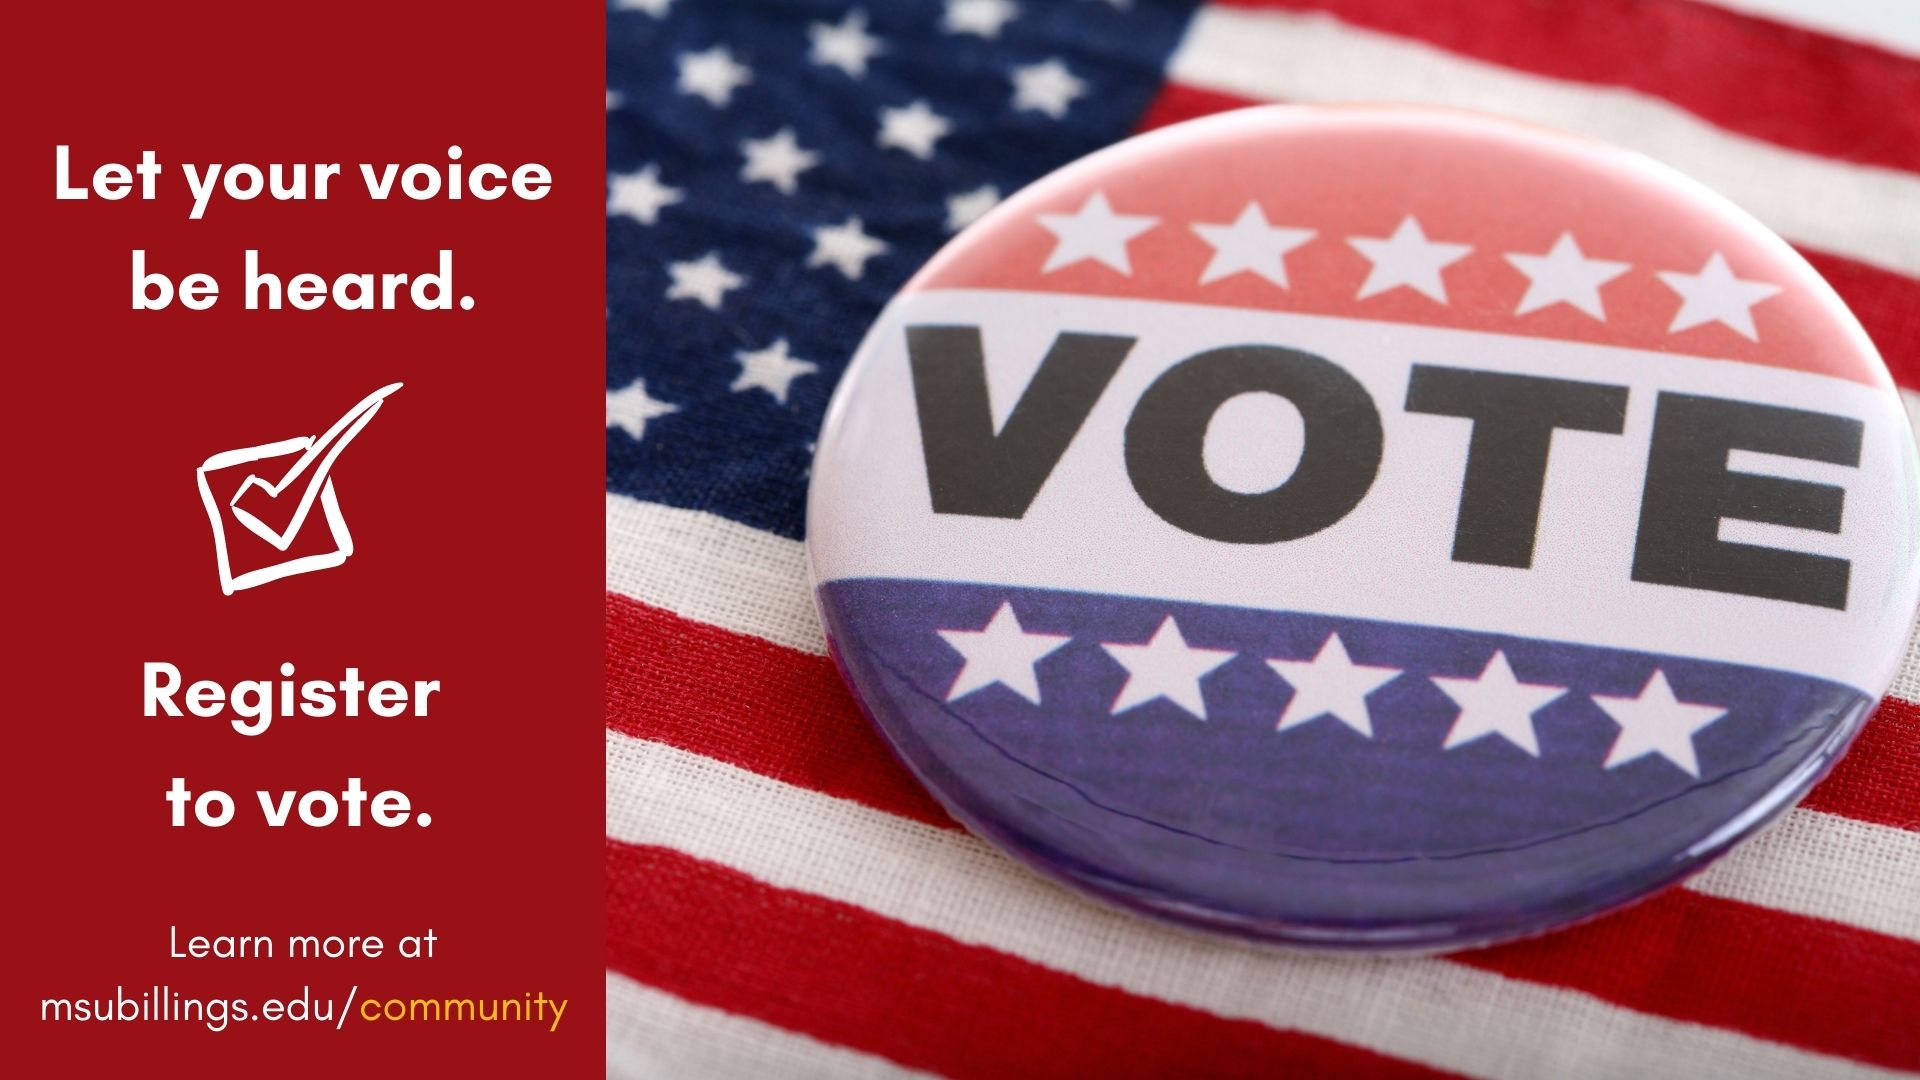 Let your voice be heard. Register to Vote today.